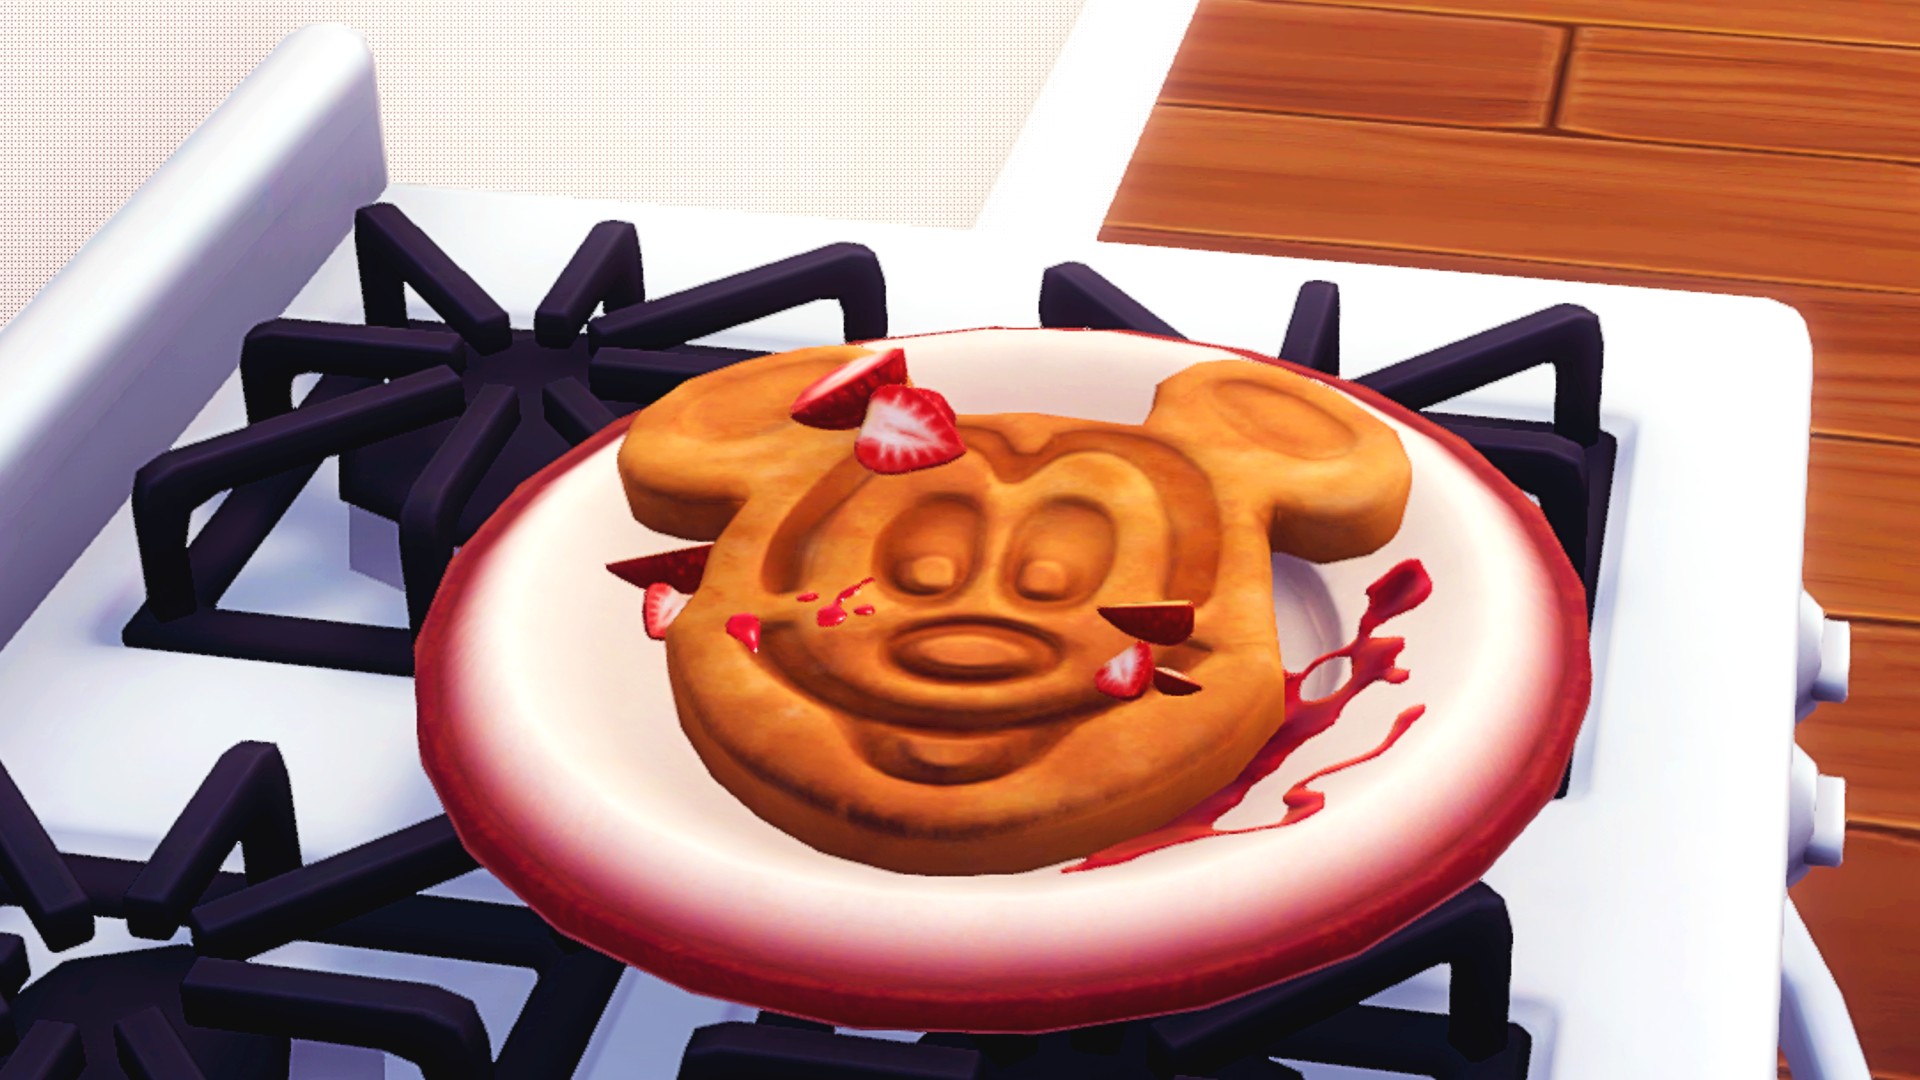 Disney Dreamlight Valley four-star recipes: A waffle shaped like Mickey's face is covered in strawberries and red jam, showing the Jam waffles recipe.